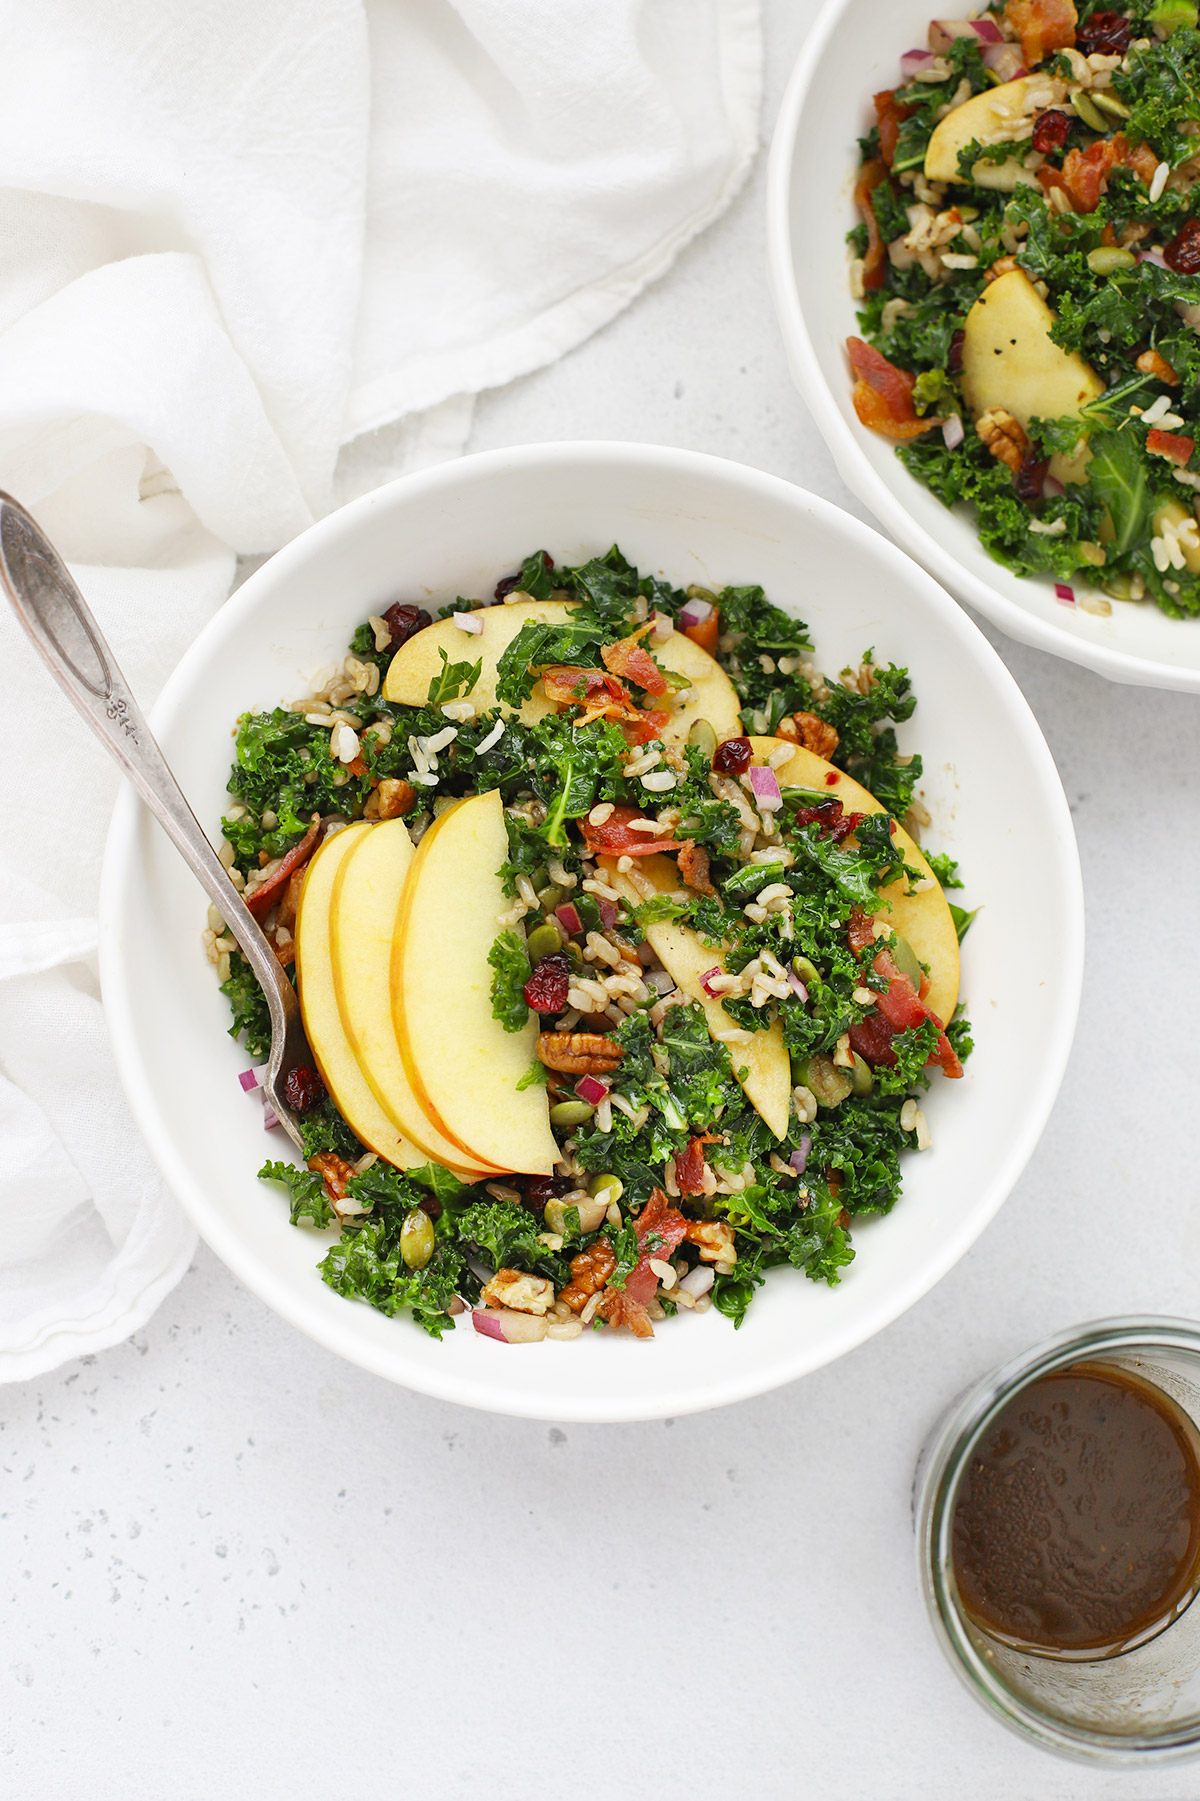 Overhead view of bowls of Harvest Apple Kale Salad with Balsamic Dressing